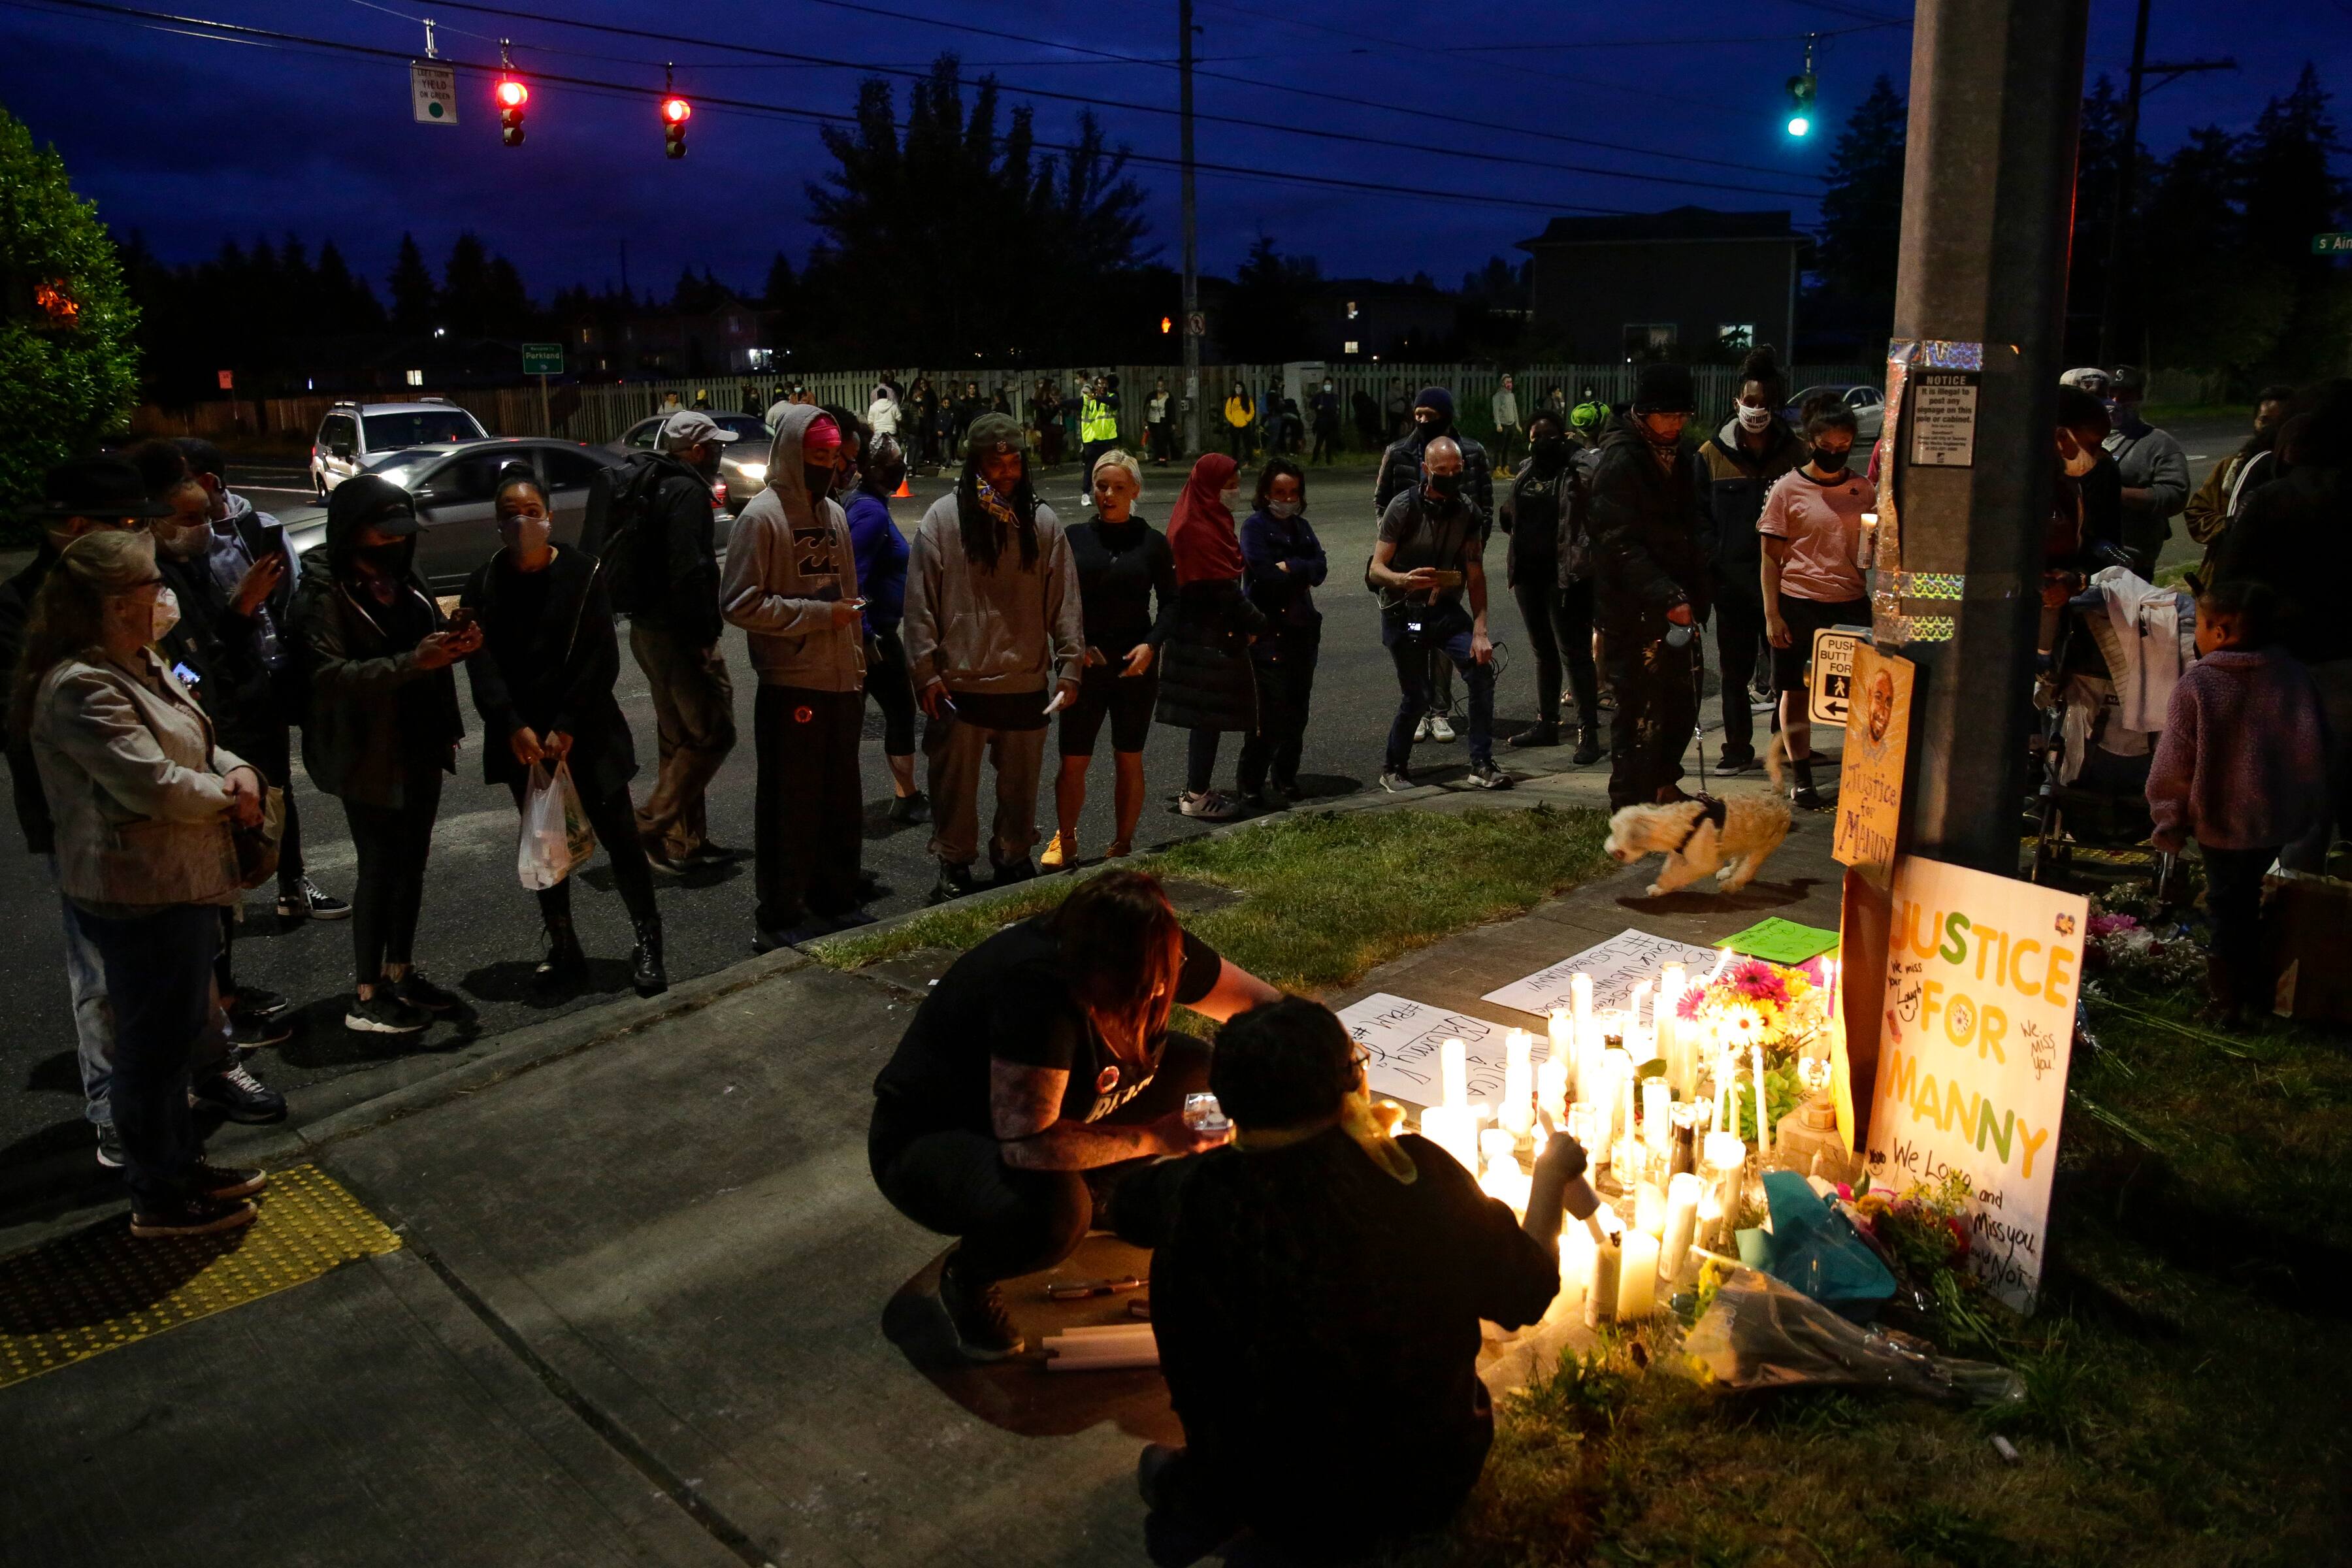 People gather and light candles at a makeshift memorial at the intersection where Manuel Ellis, a 33-year-old black man, died in Tacoma Police custody on March 3 and was recently ruled a homicide, according to the Pierce County Medical Examiners Office, in Tacoma, Washington on June 3, 2020. - US protesters welcomed new charges brought June 3 against Minneapolis officers in the killing of African American man George Floyd -- but thousands still marched in cities across the country for a ninth straight night, chanting against racism and police brutality. (Photo by Jason Redmond / AFP) (Photo by JASON REDMOND/AFP via Getty Images)